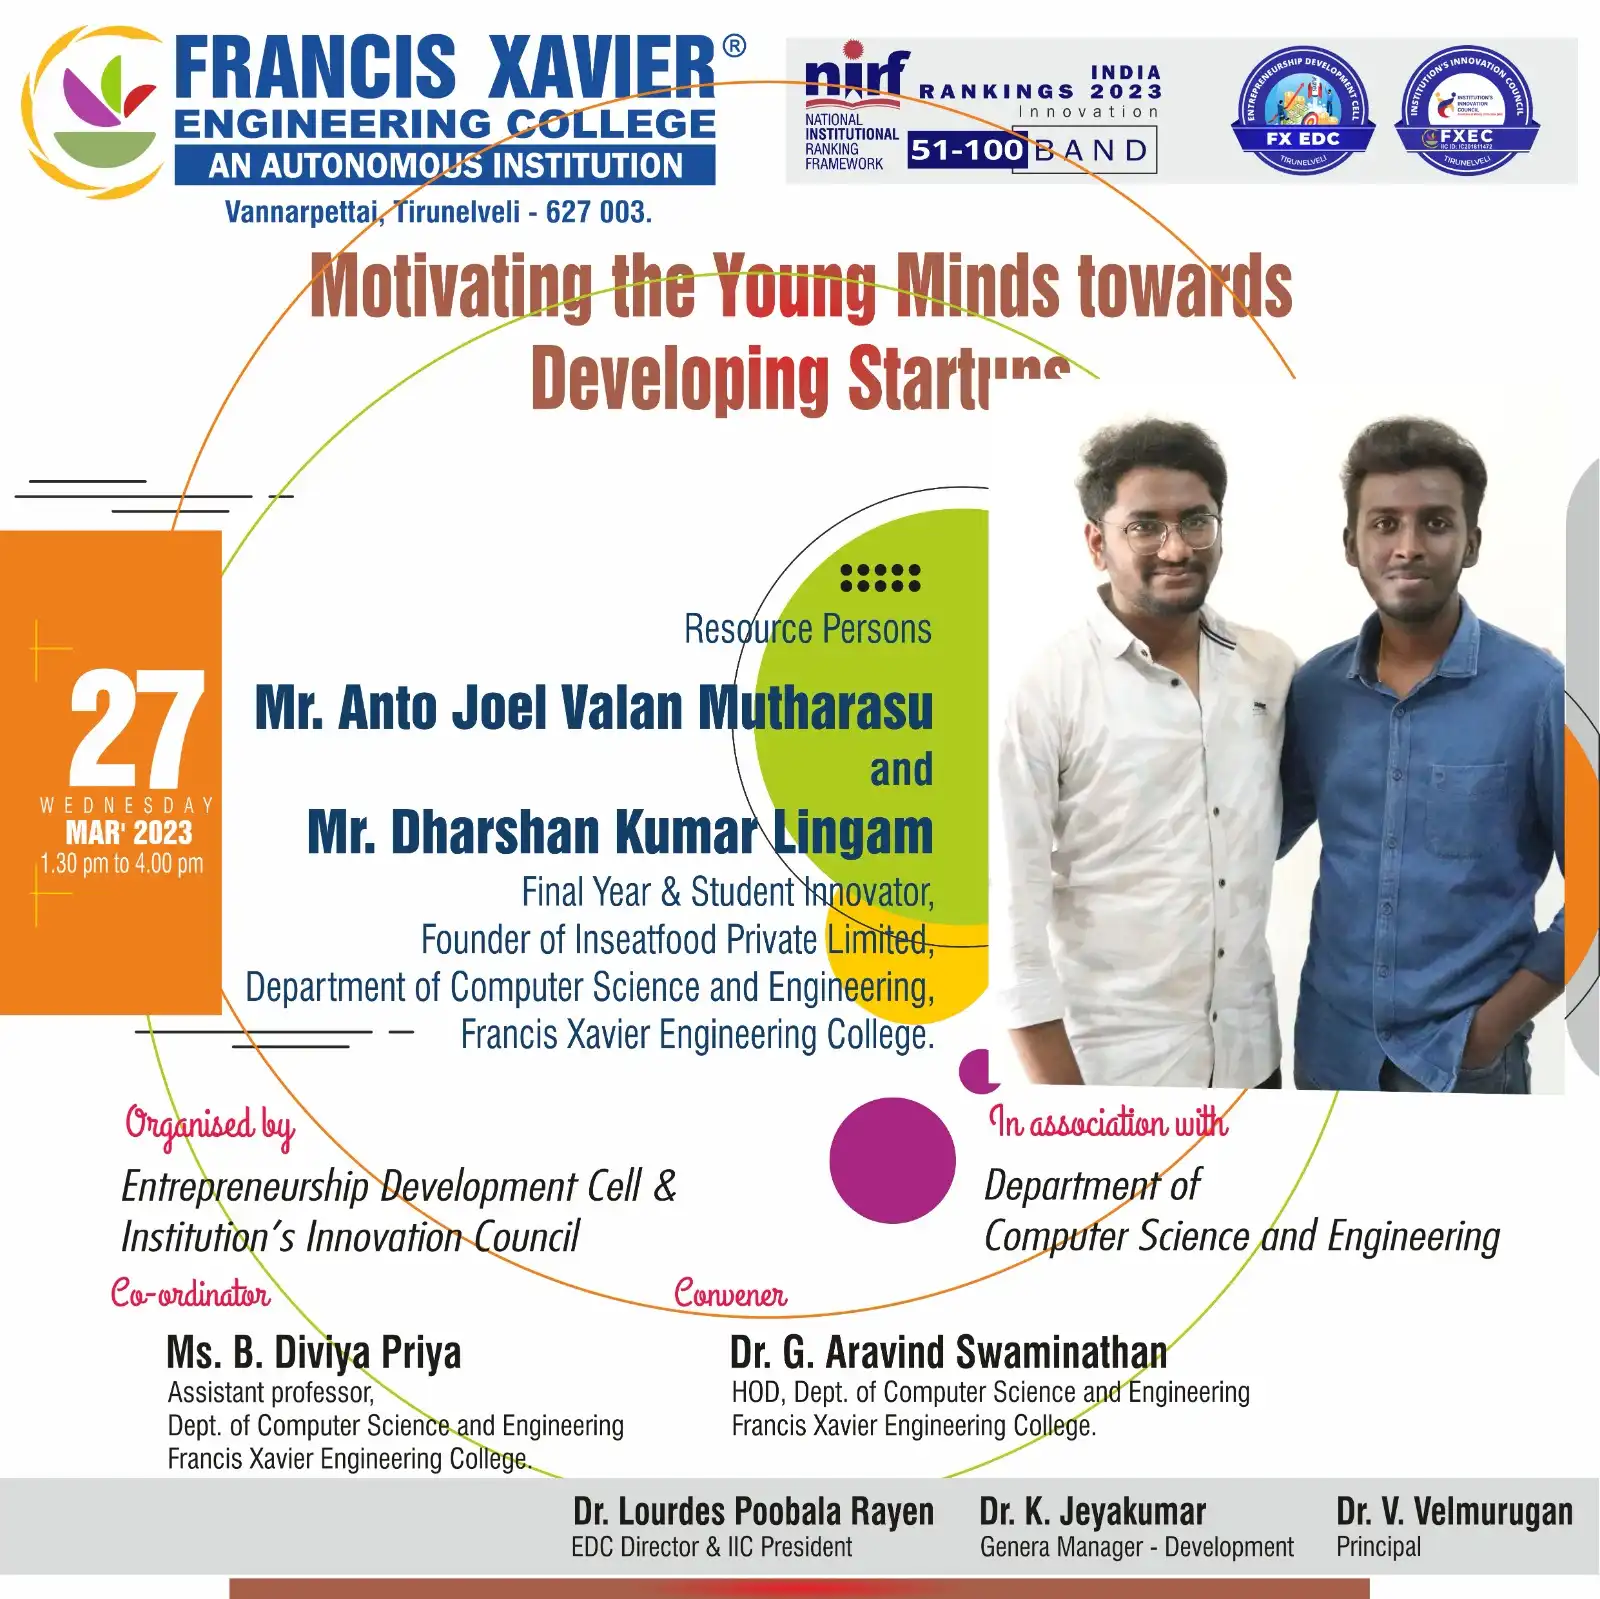 Motivating the Young Minds Towards Developing Startups